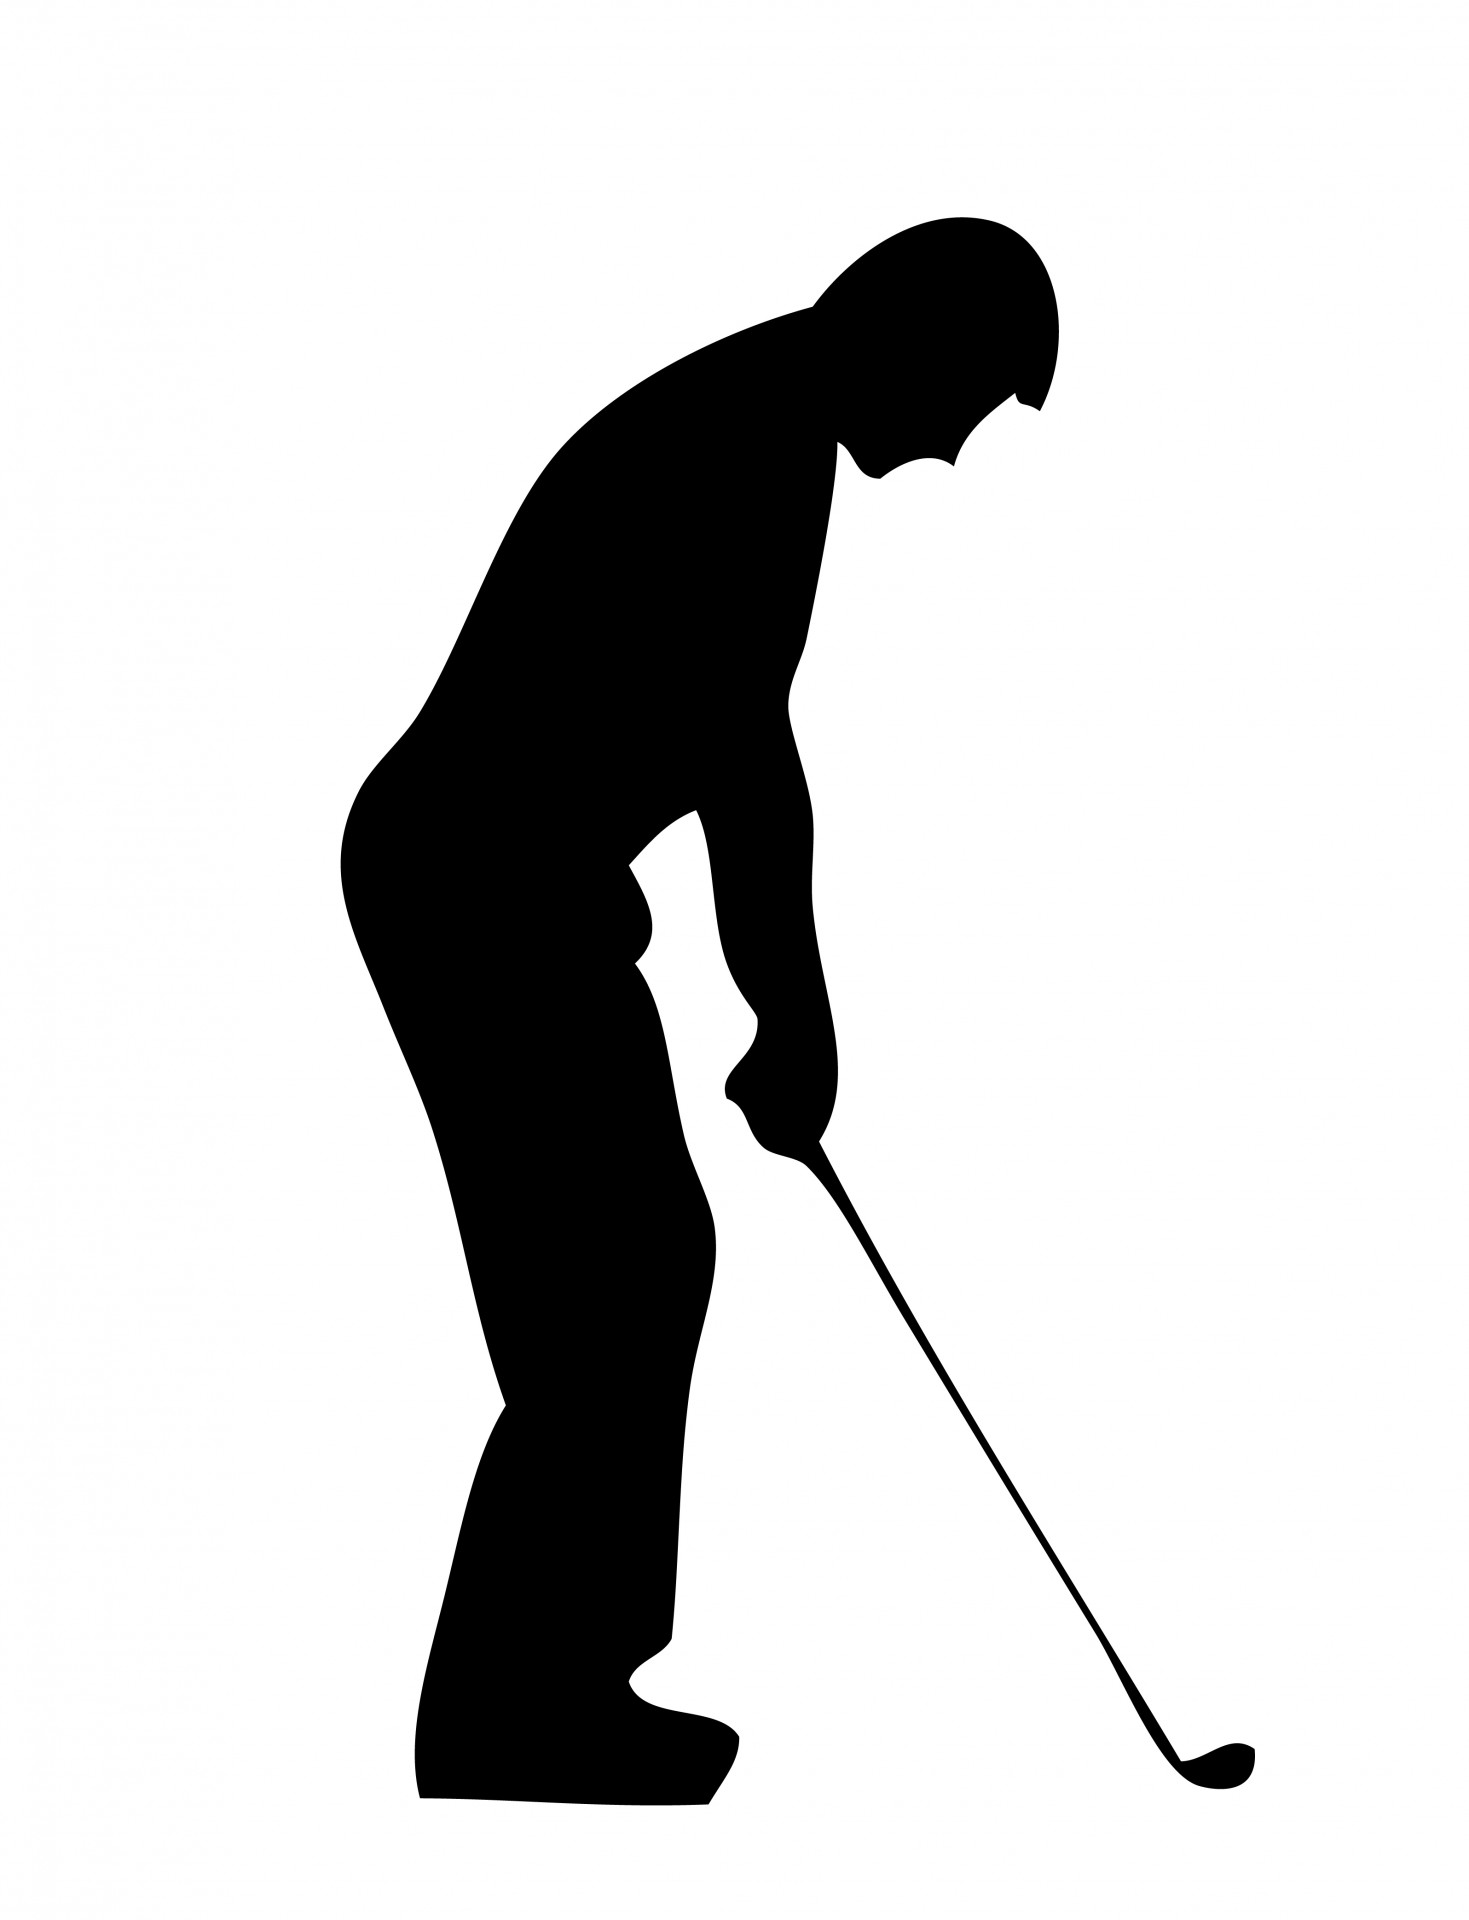 Free Golf Silhouette Cliparts, Download Free Clip Art, Free